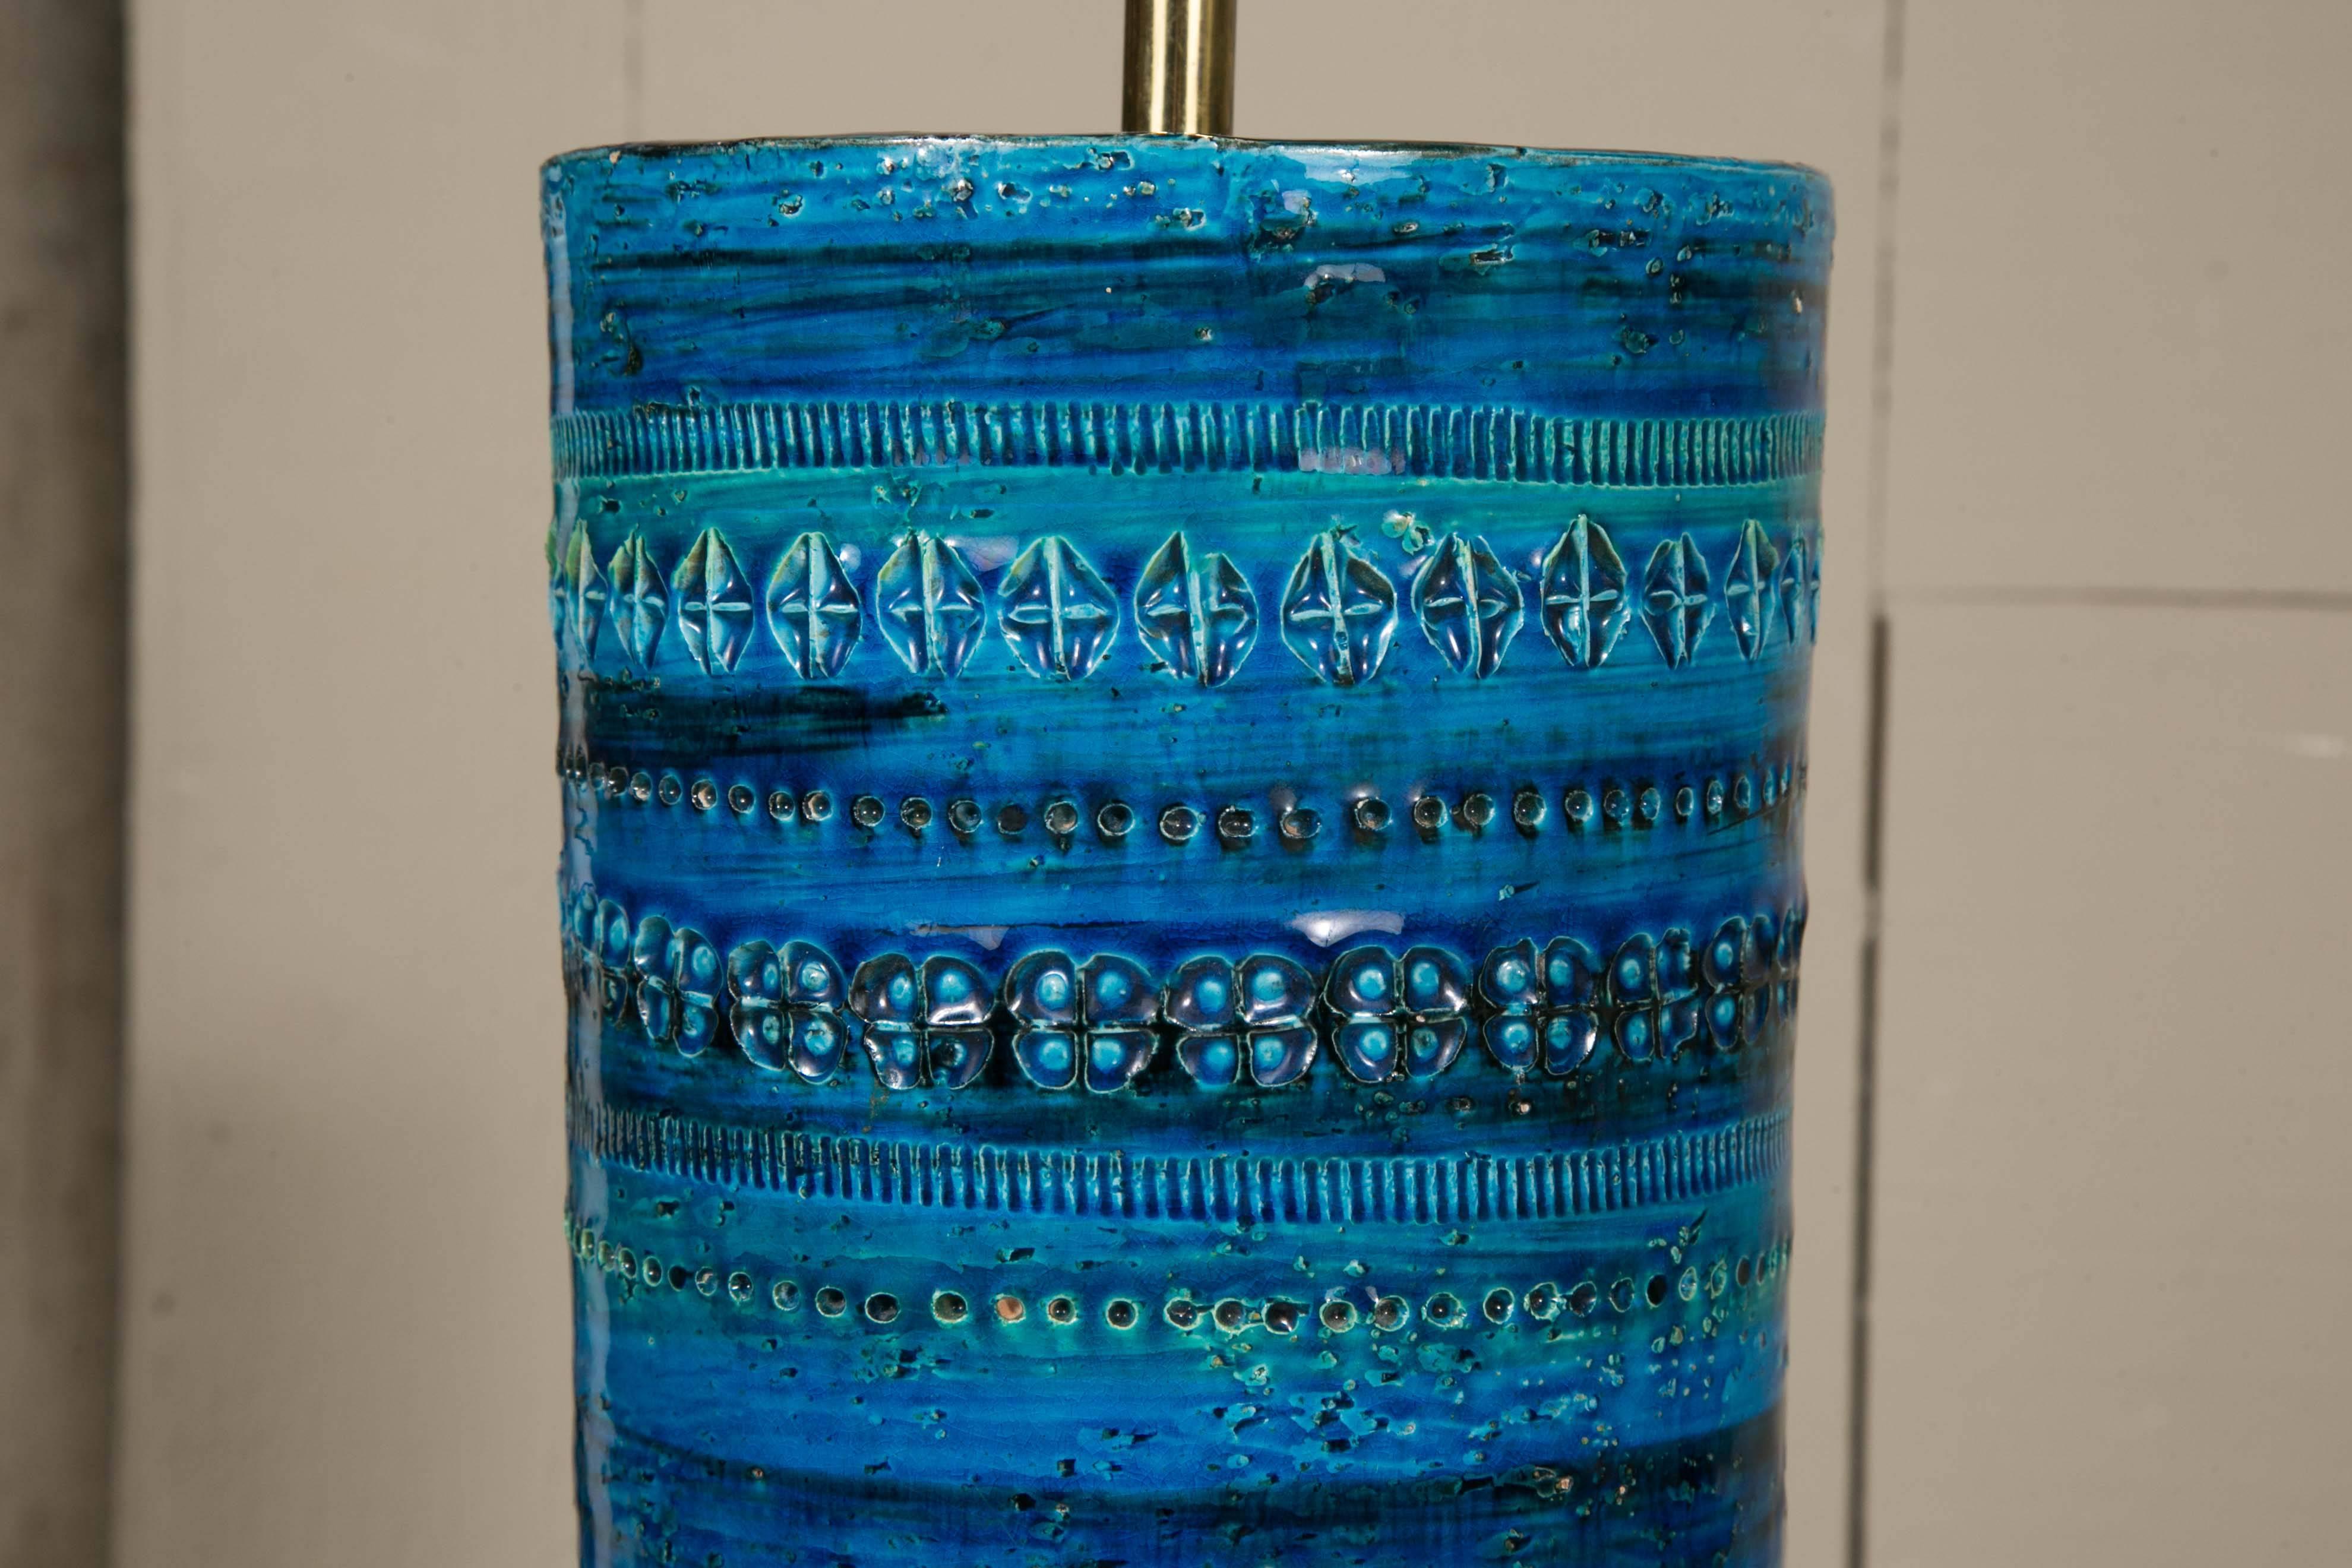 A large, handmade Mid-Century Modern ceramic cylindrical shaped table lamp.
Designed by Aldo Londi's for the collection Rimini Blu in 1959 and produced by Bitossi Ceramiche.
The deep blue glaze varies in blue/turquoise shades and undertones like